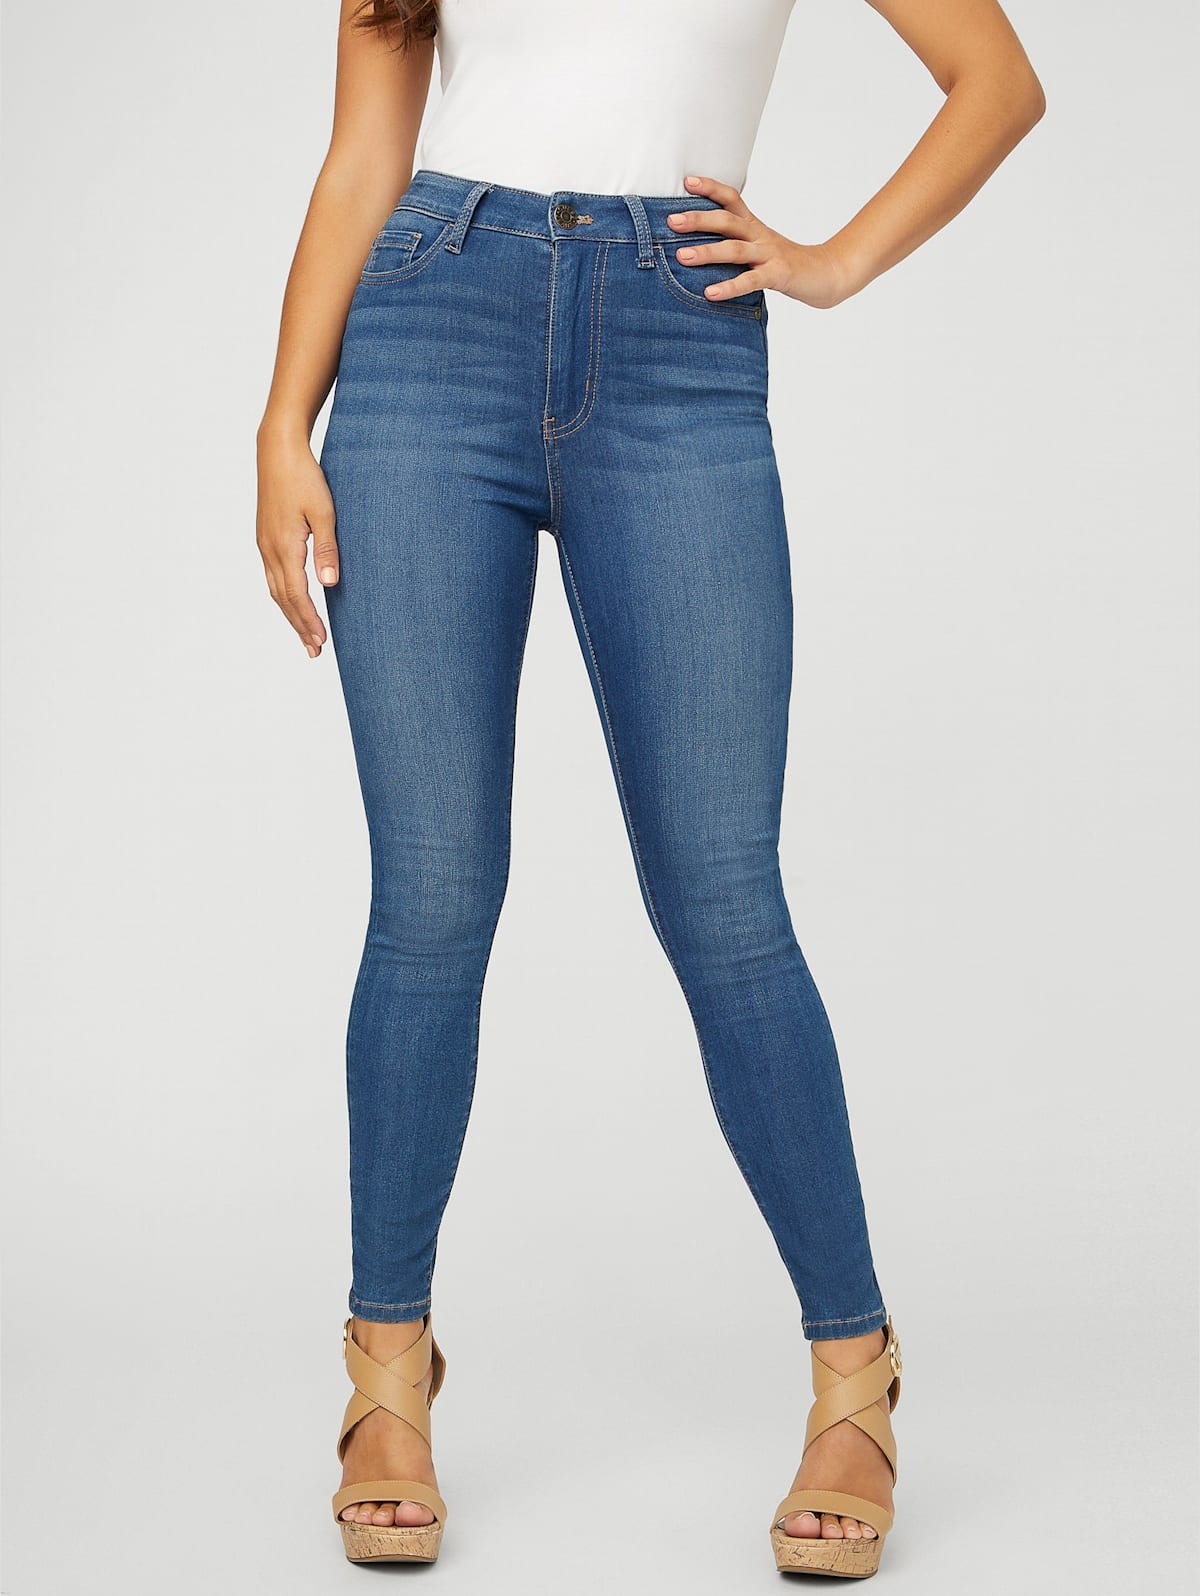 GUESS Factory Women's Simmone Super High-Rise Skinny Jeans 